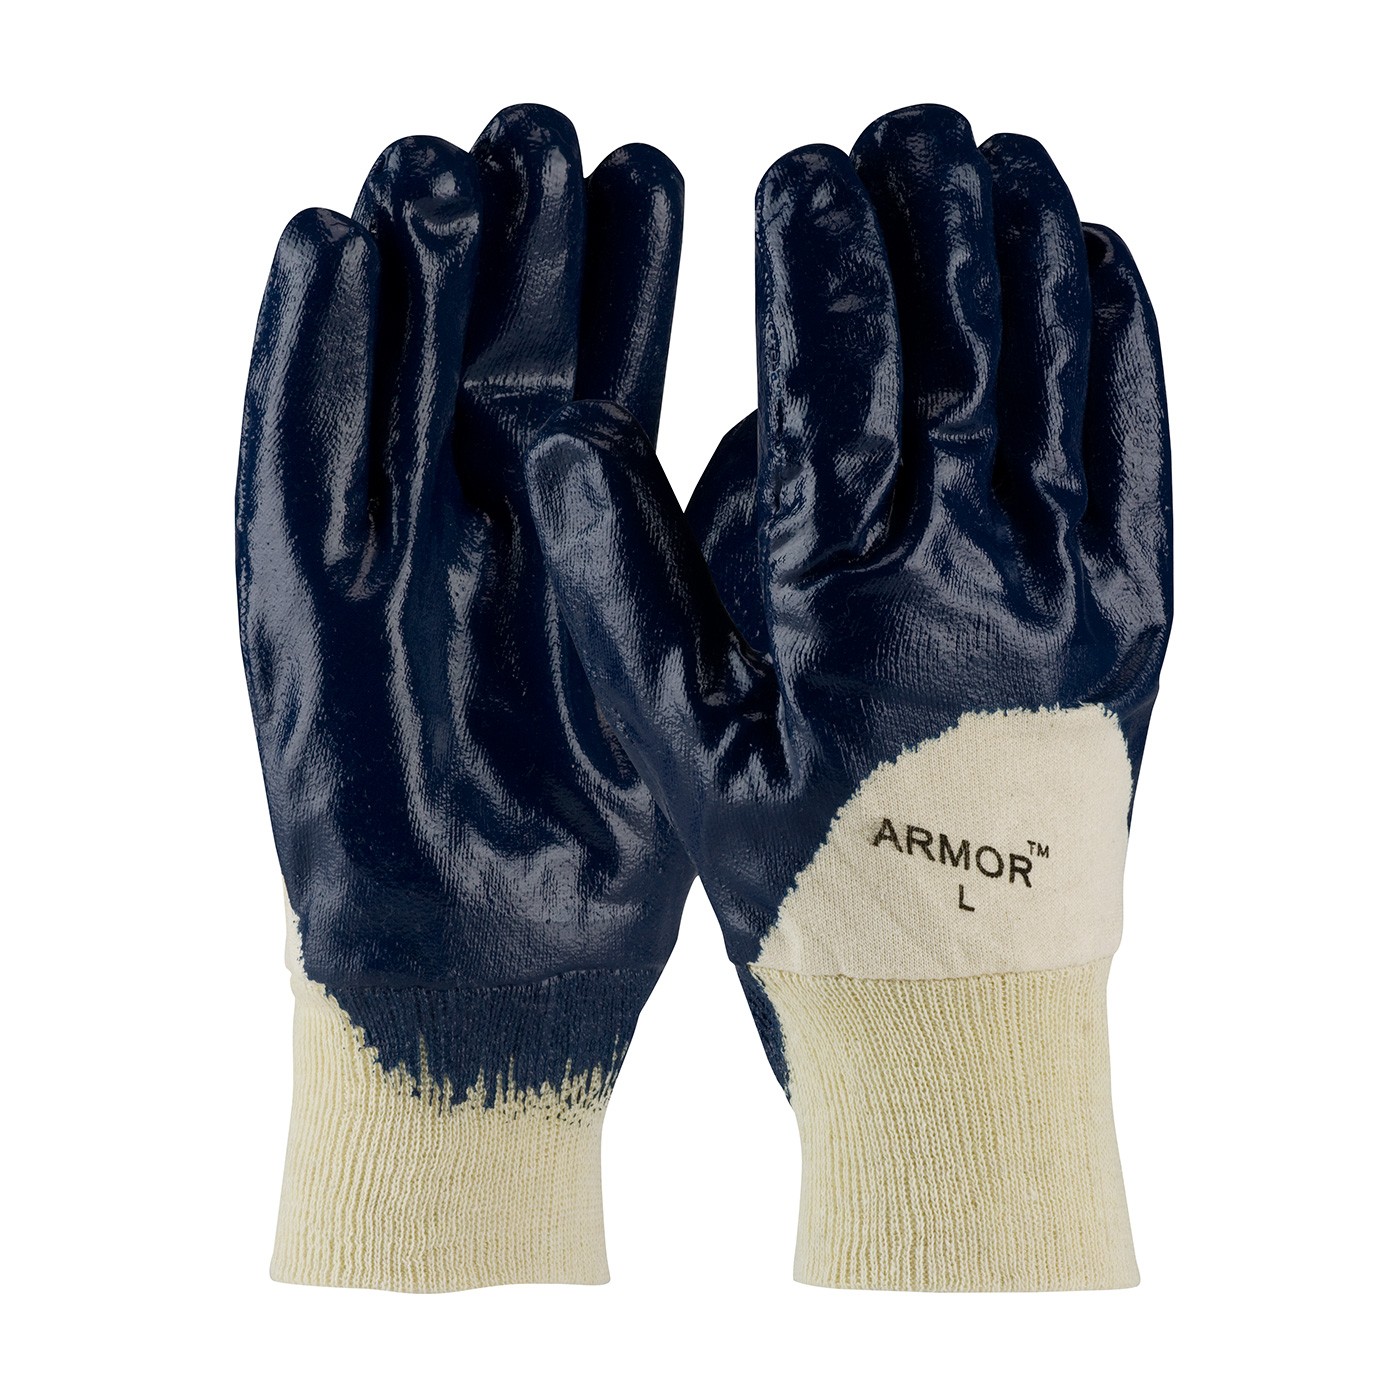 ArmorTuff® Nitrile Dipped Glove with Jersey Liner and Smooth Finish on Palm, Fingers & Knuckles - Knitwrist  (#56-3151)